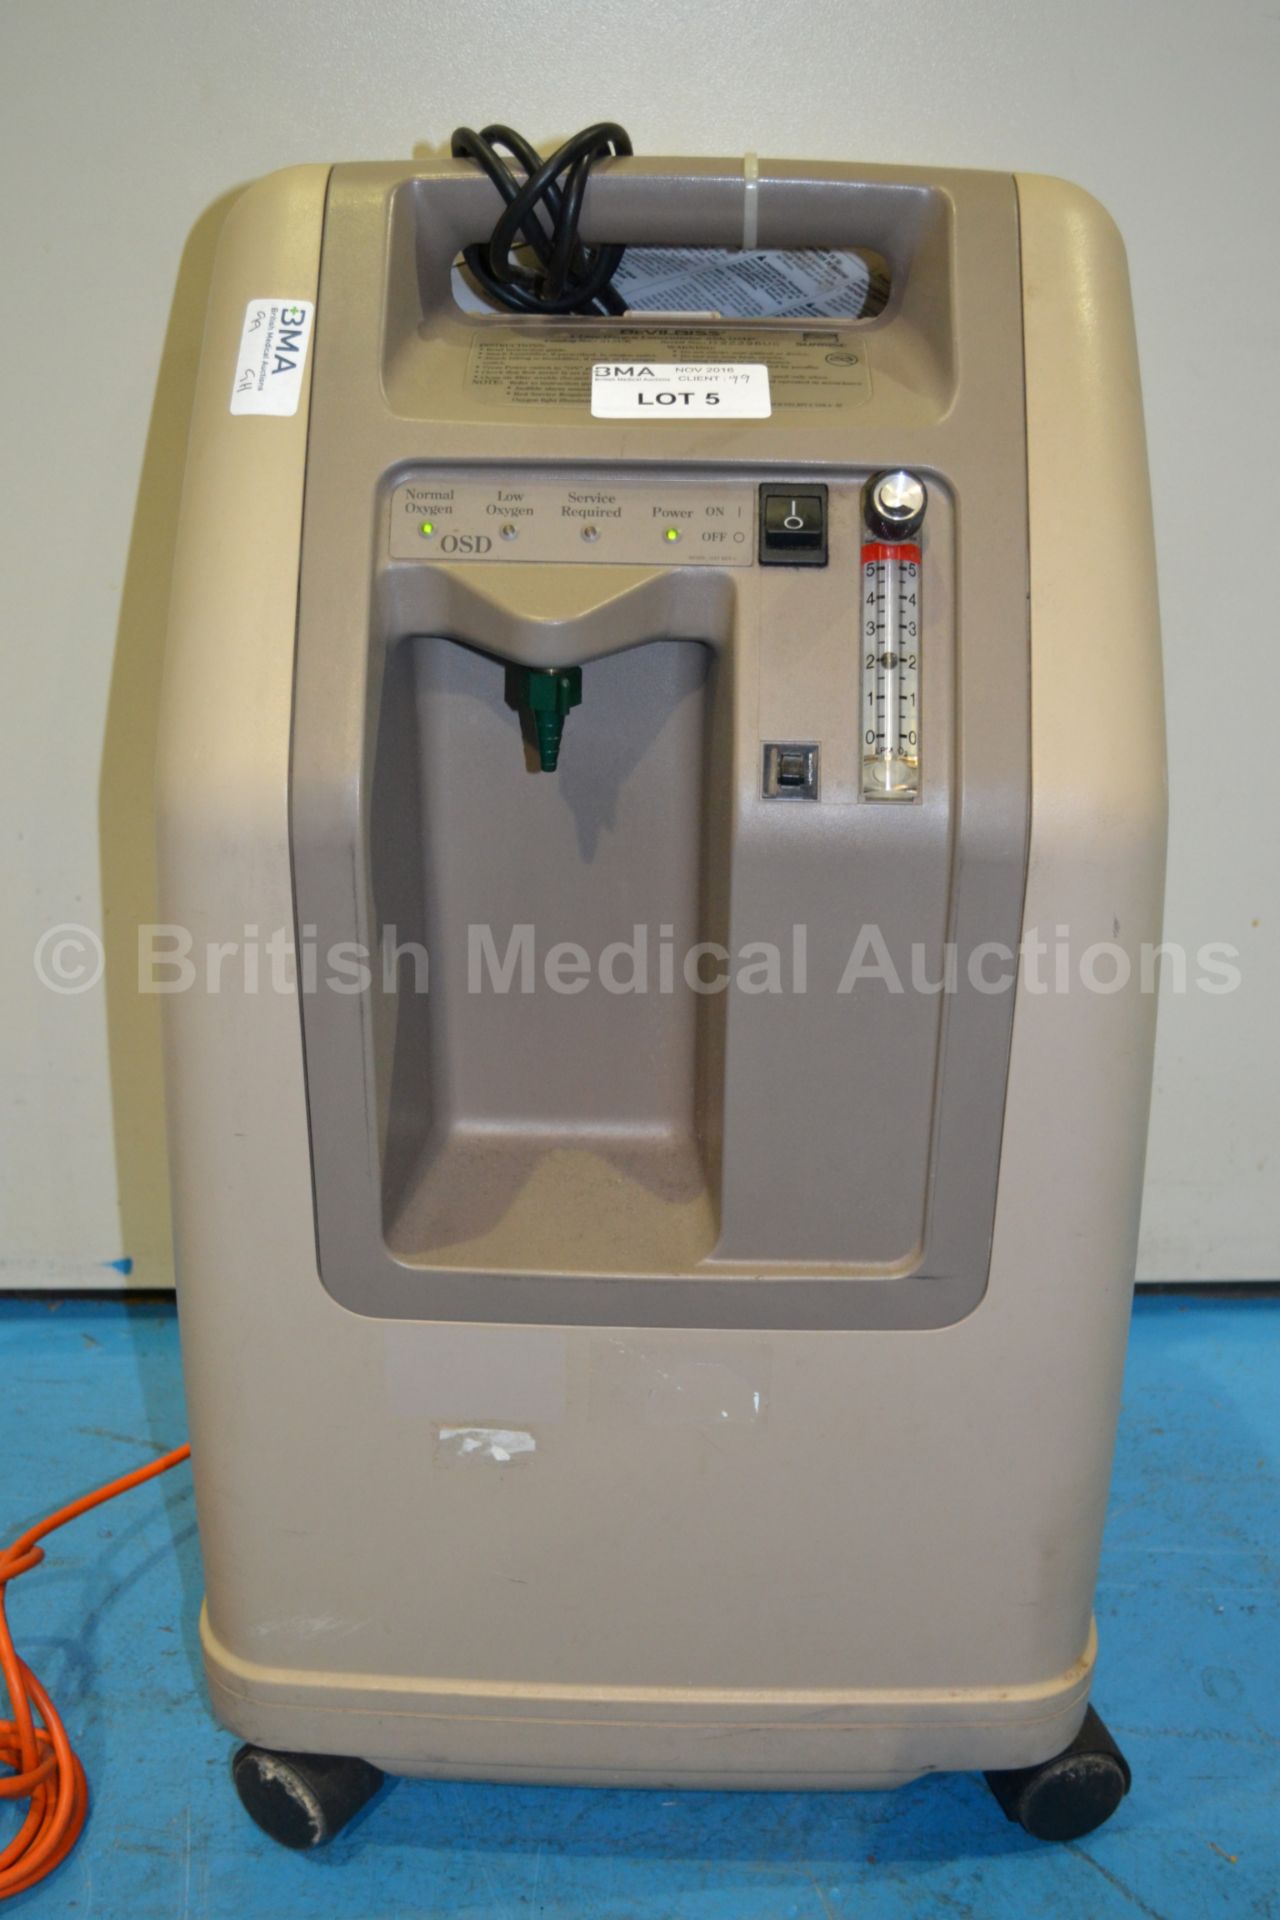 DeVilbiss 4 Litre Oxygen Concentrator with OSD (Po - Image 3 of 3